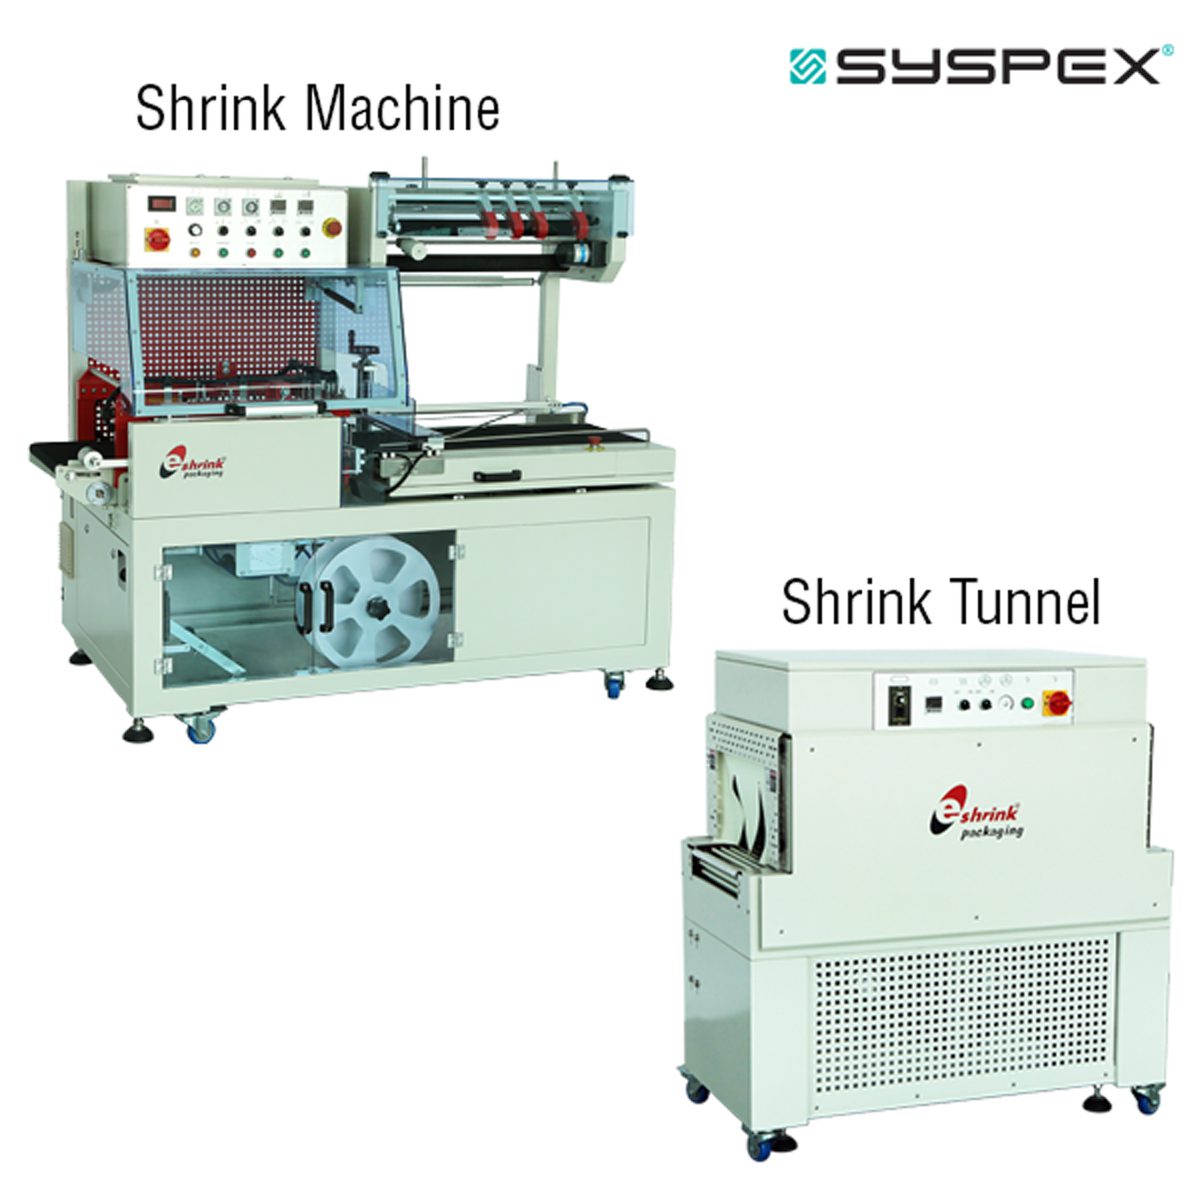 Shrink Machine And Shrink Tunnel